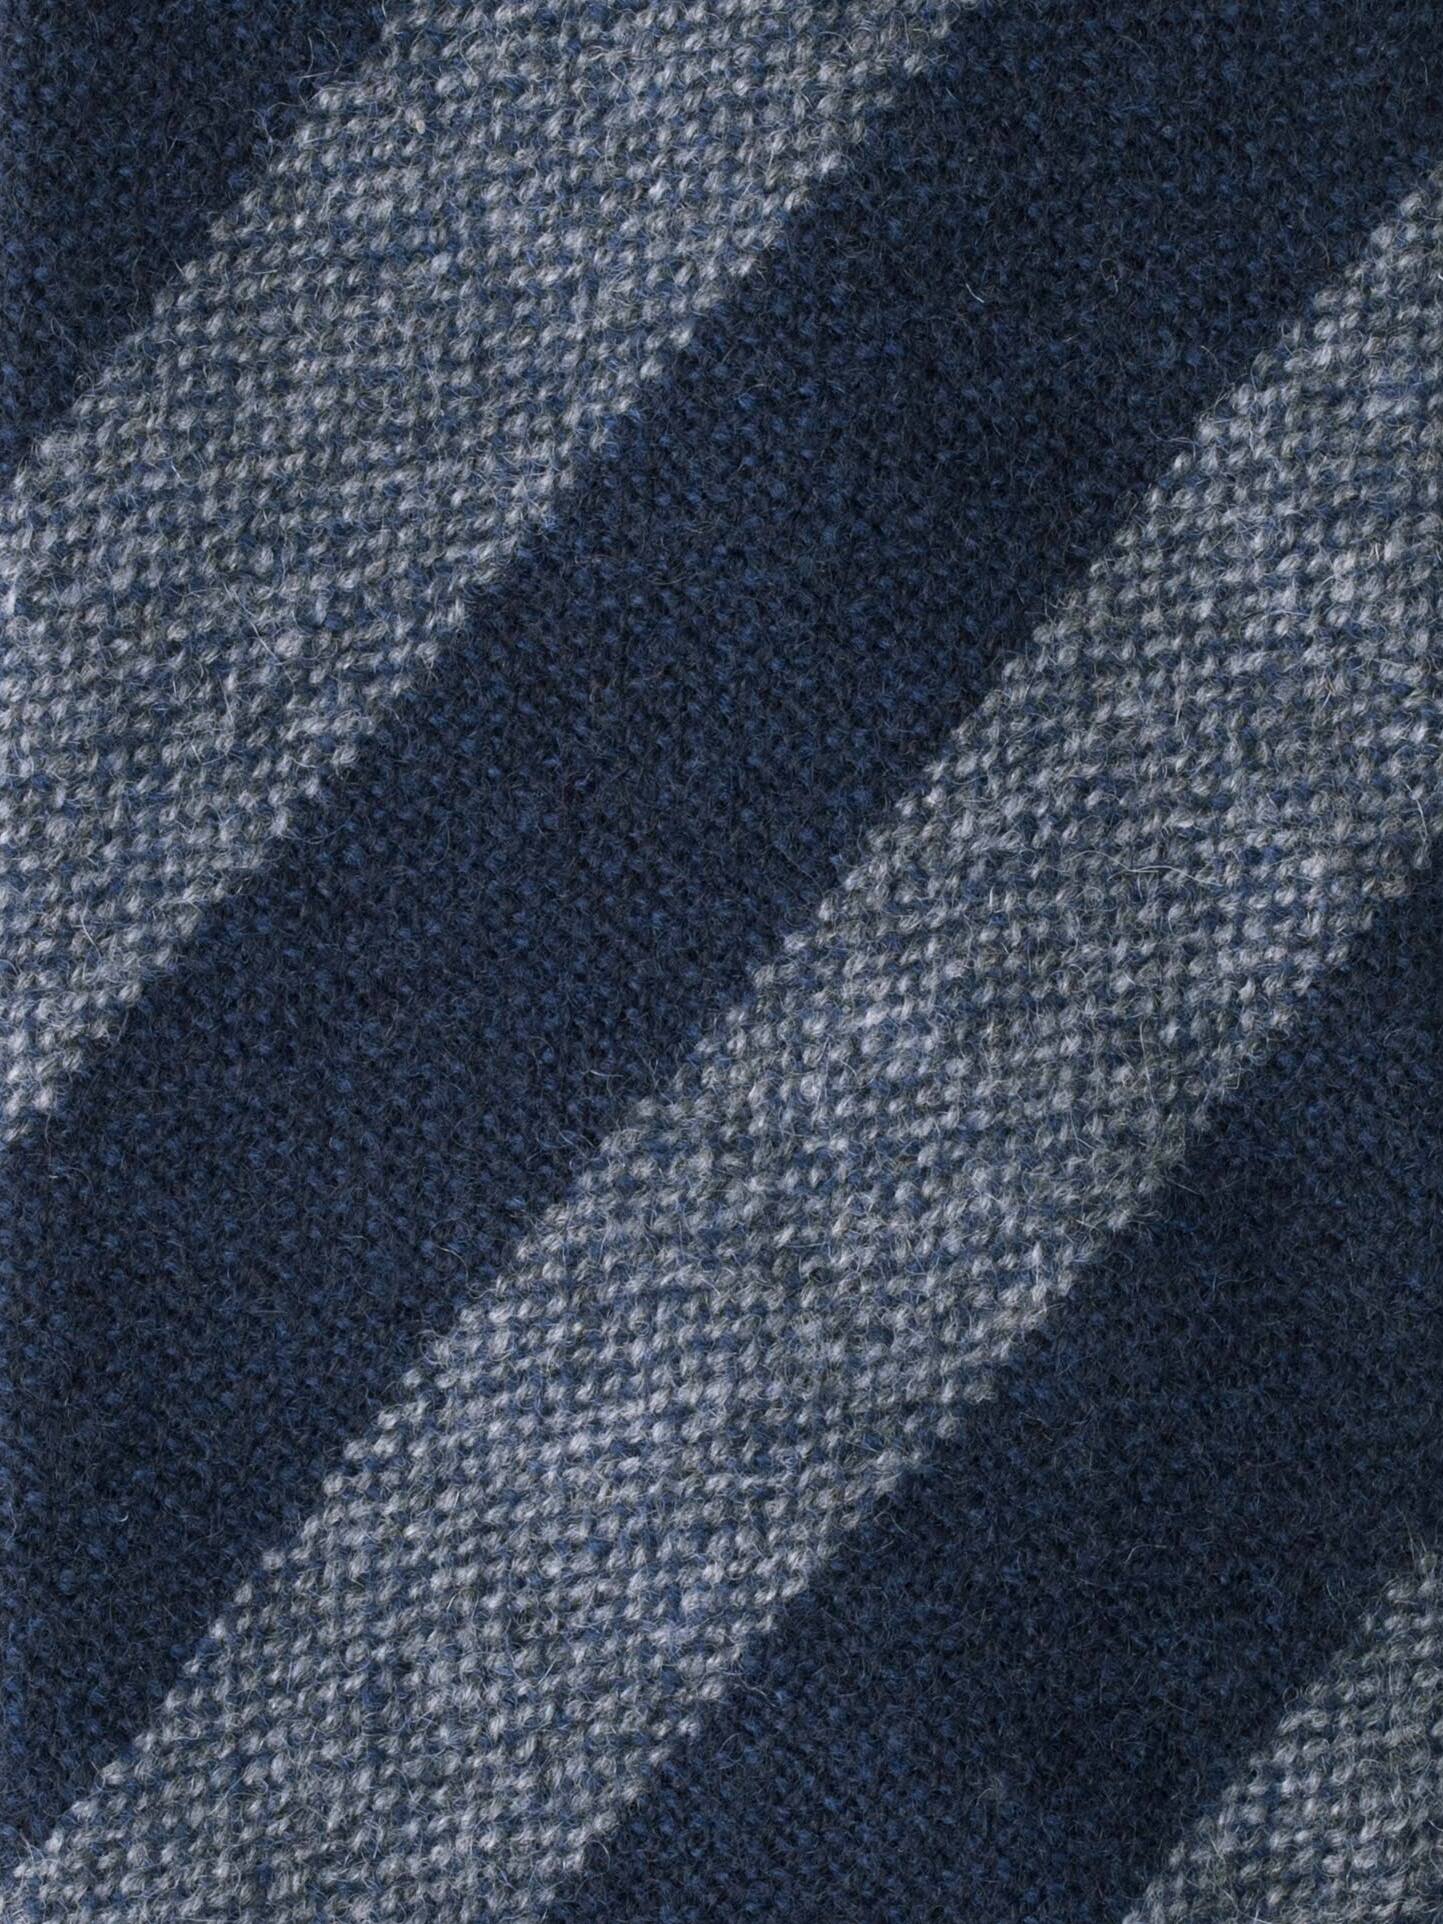 Grey and Navy Striped Cashmere Tie by Proper Cloth